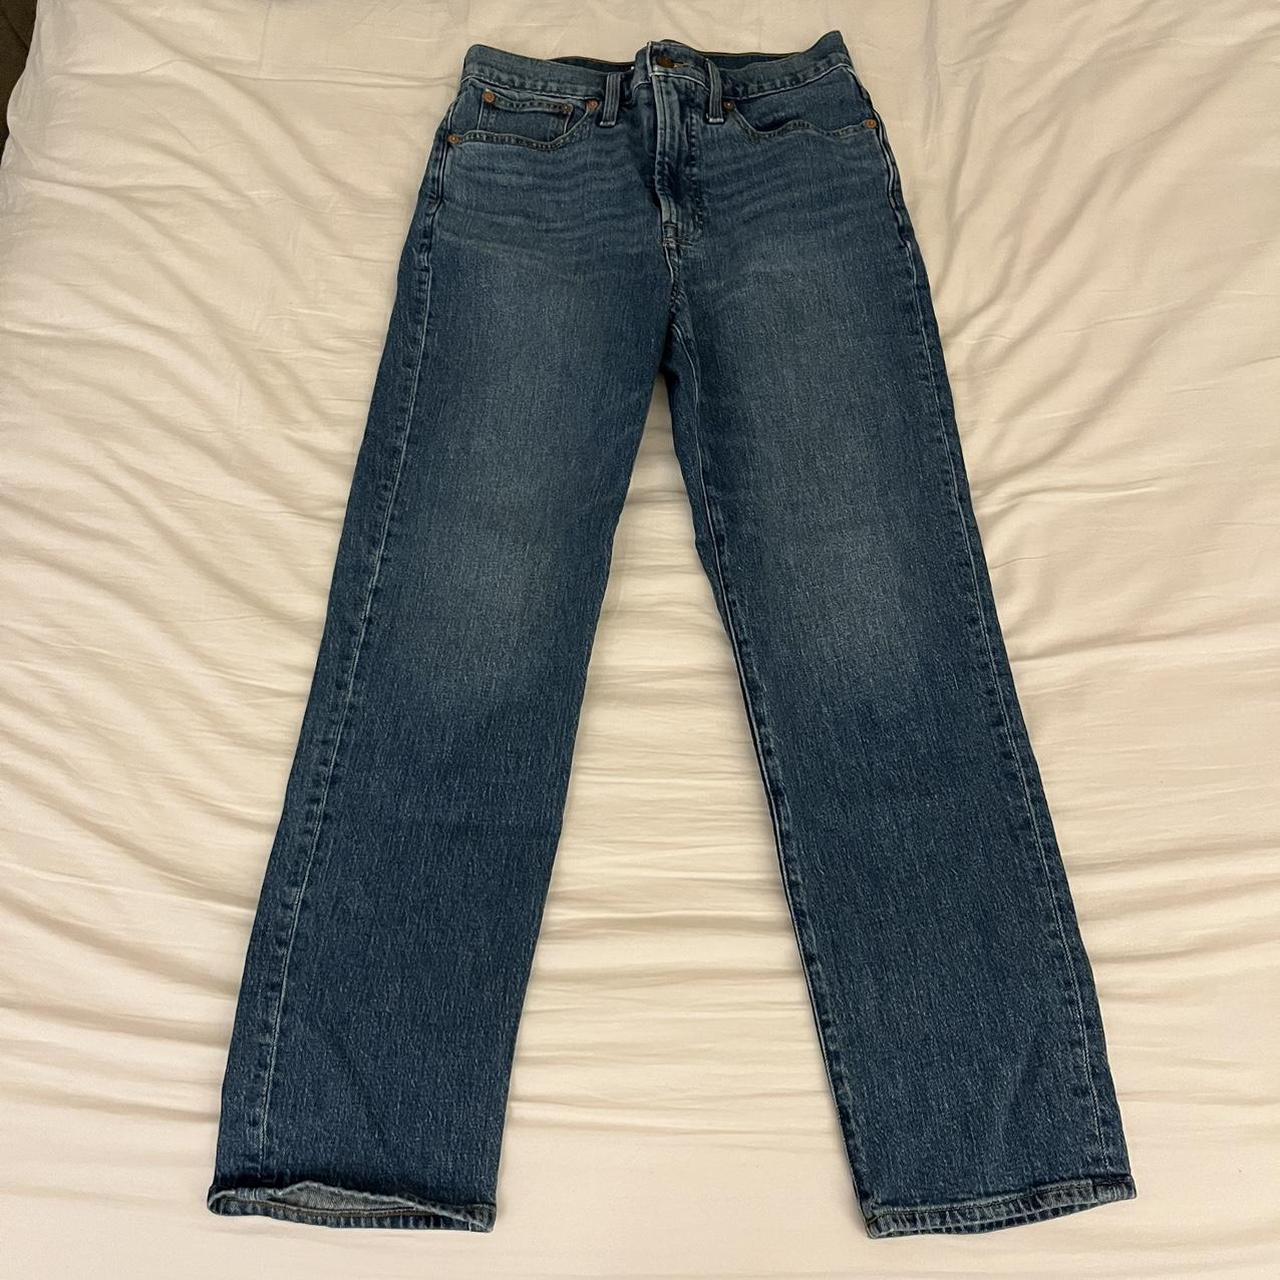 Madewell Men's Navy and Blue Jeans | Depop